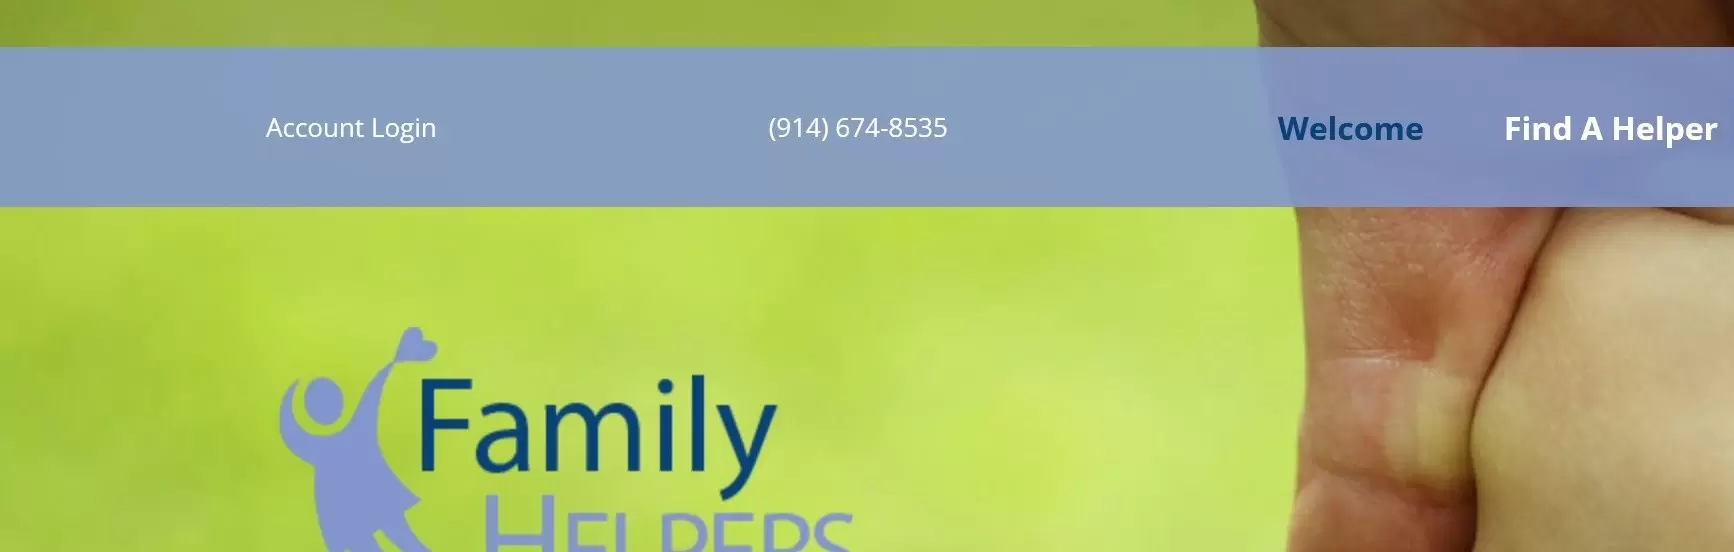 Family Helpers Inc company profile and reviews